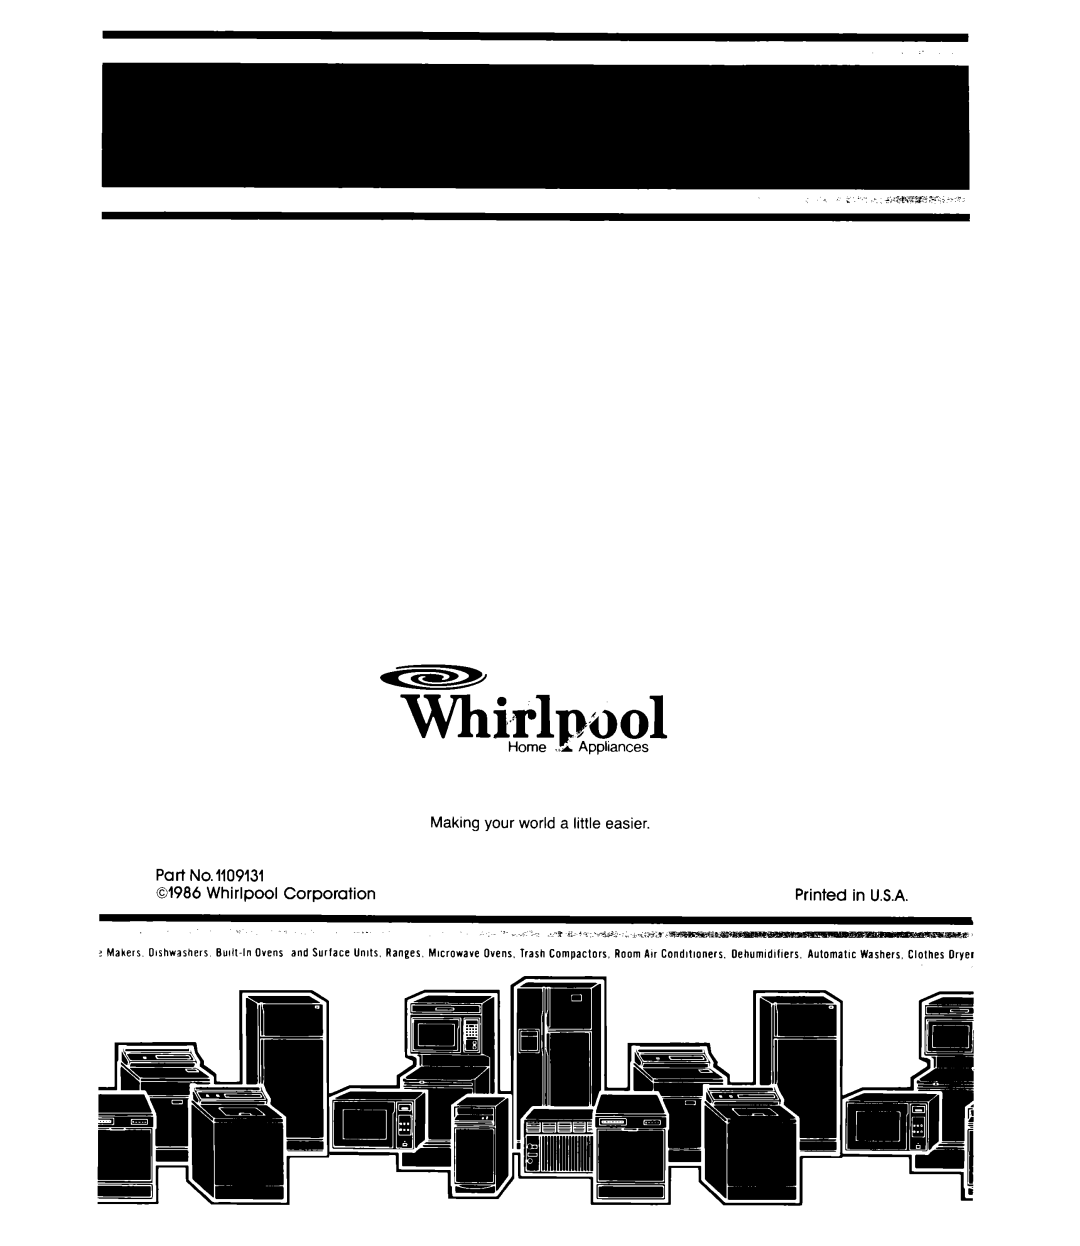 Whirlpool EDISSC manual whirlpool, Home ..A /Appliances, Making your world a little easier, Whirlpool Corporation 